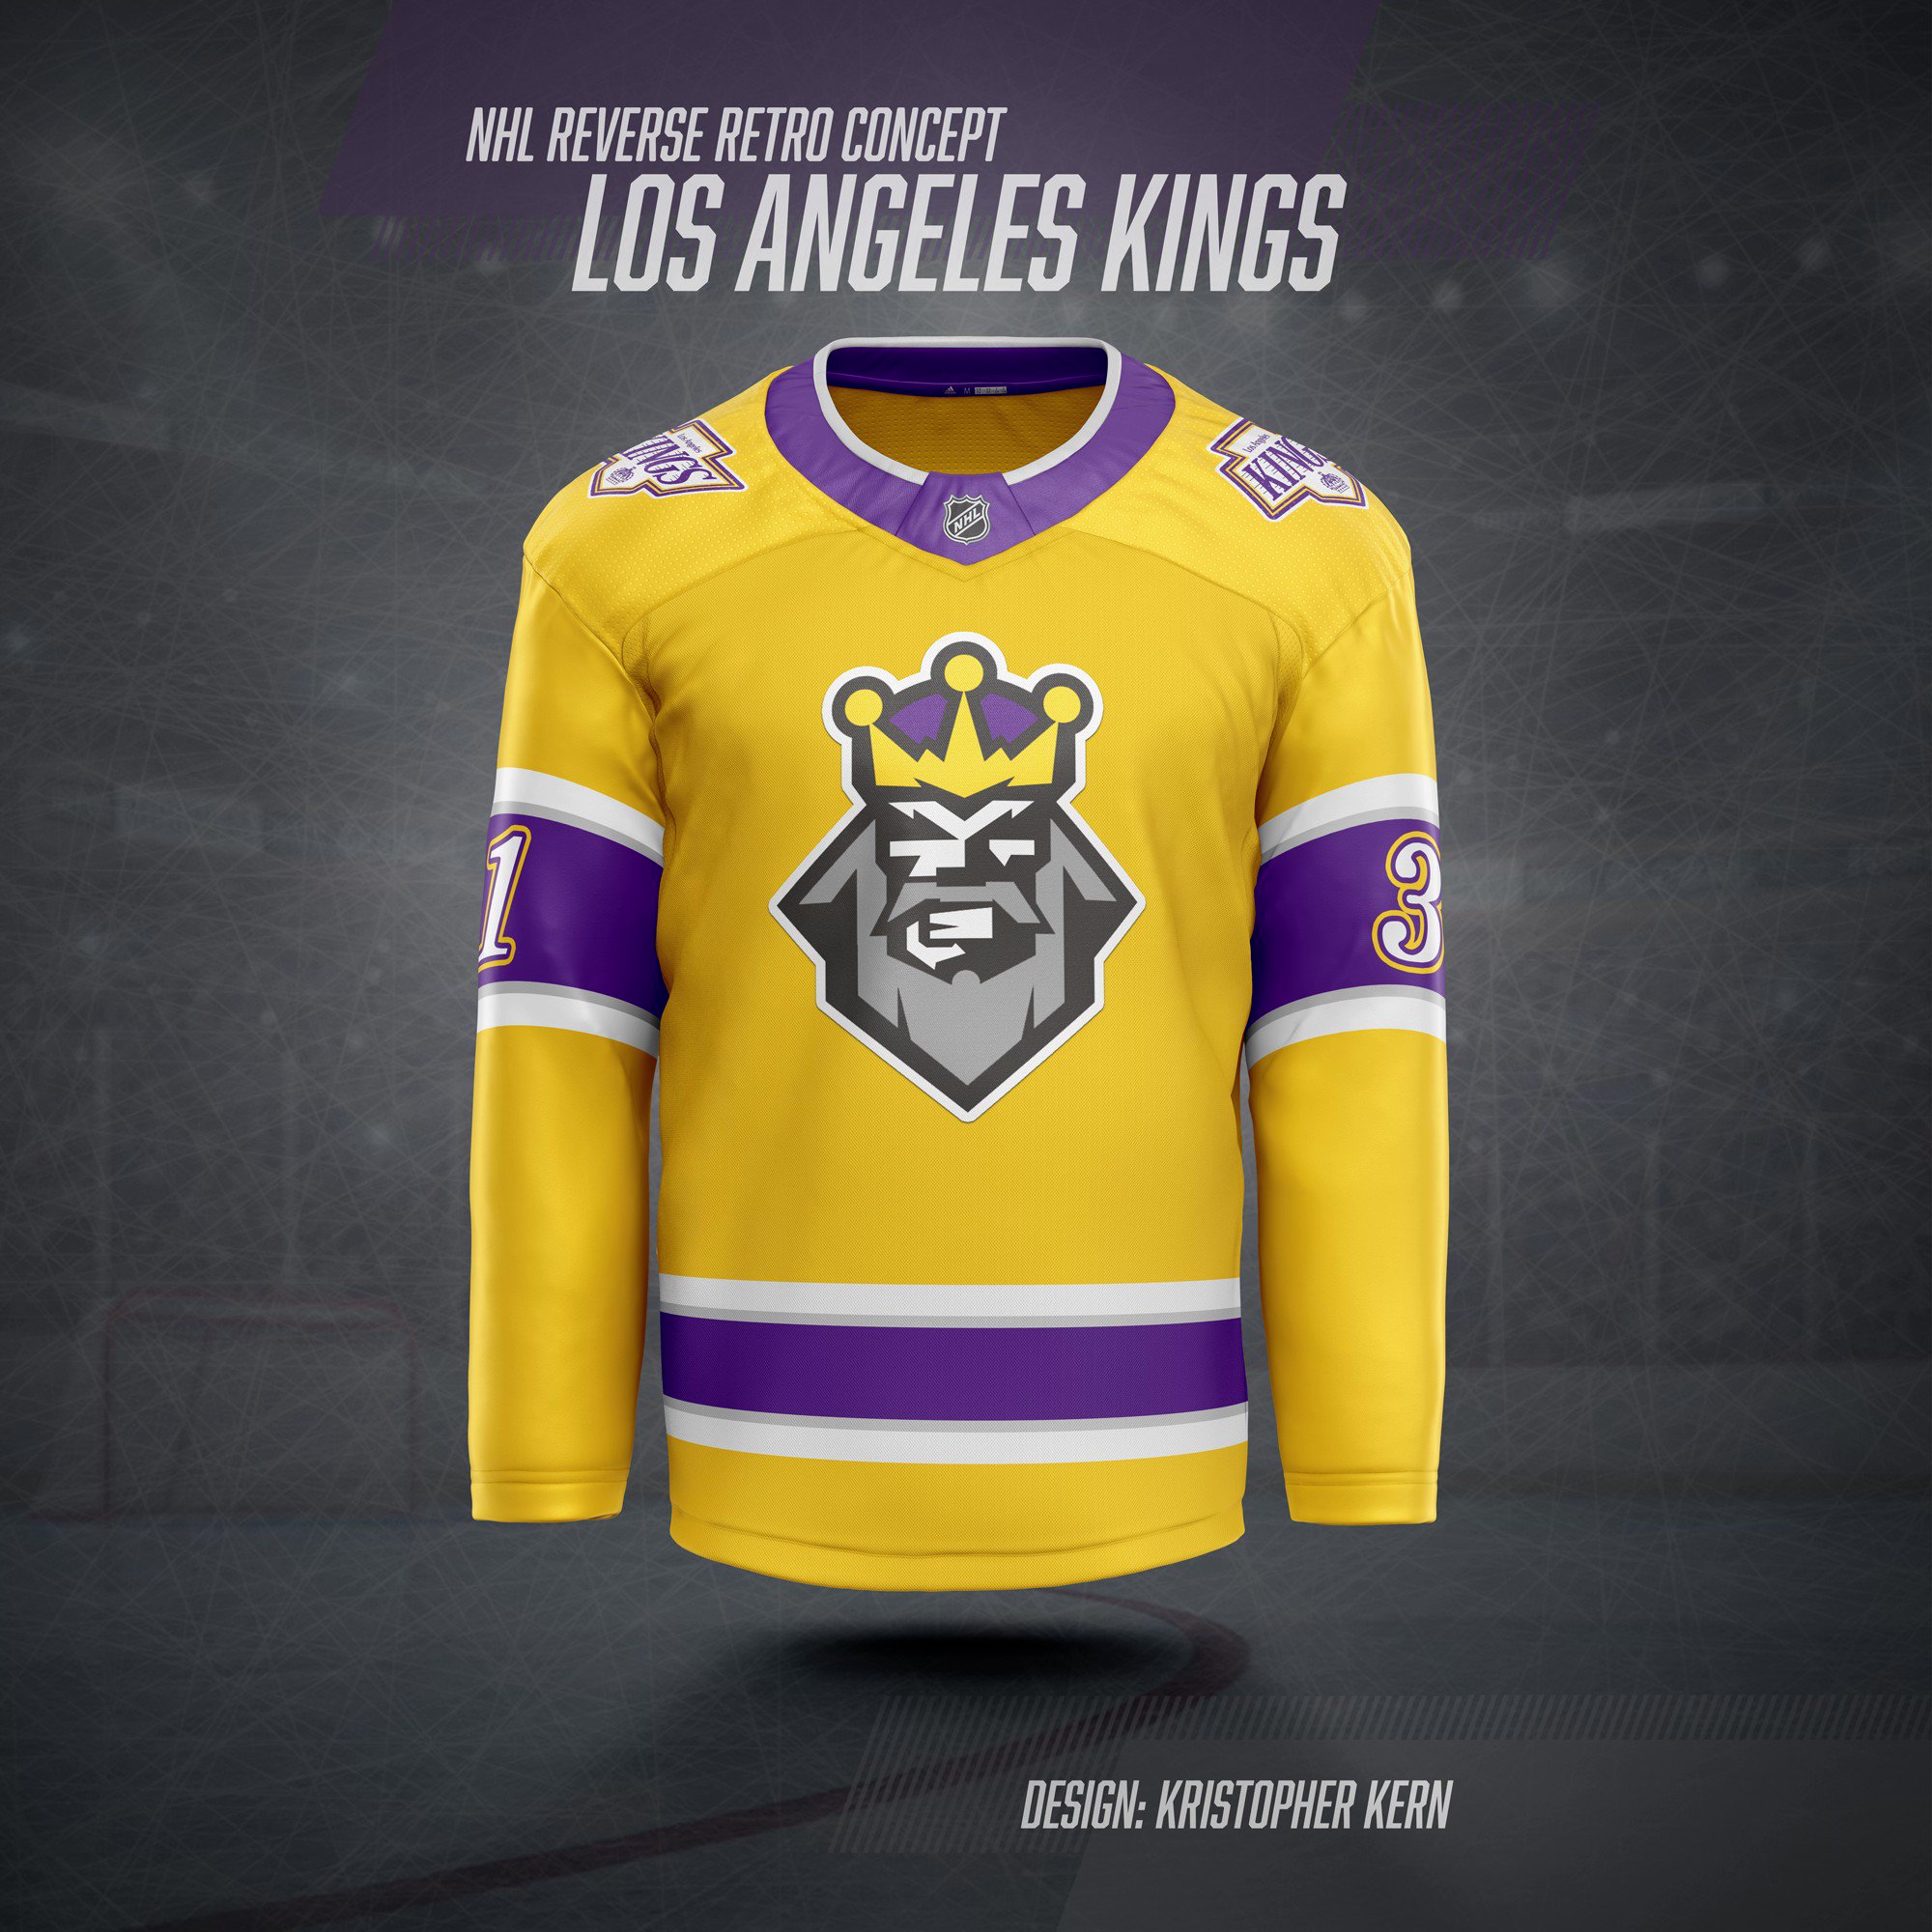 Kristopher Kern on X: And last but not least, a faux-back #ReverseRetro  design concept for the @GoldenKnights that utilizes only the V from the  wordmark. #NHL #VegasBorn  / X